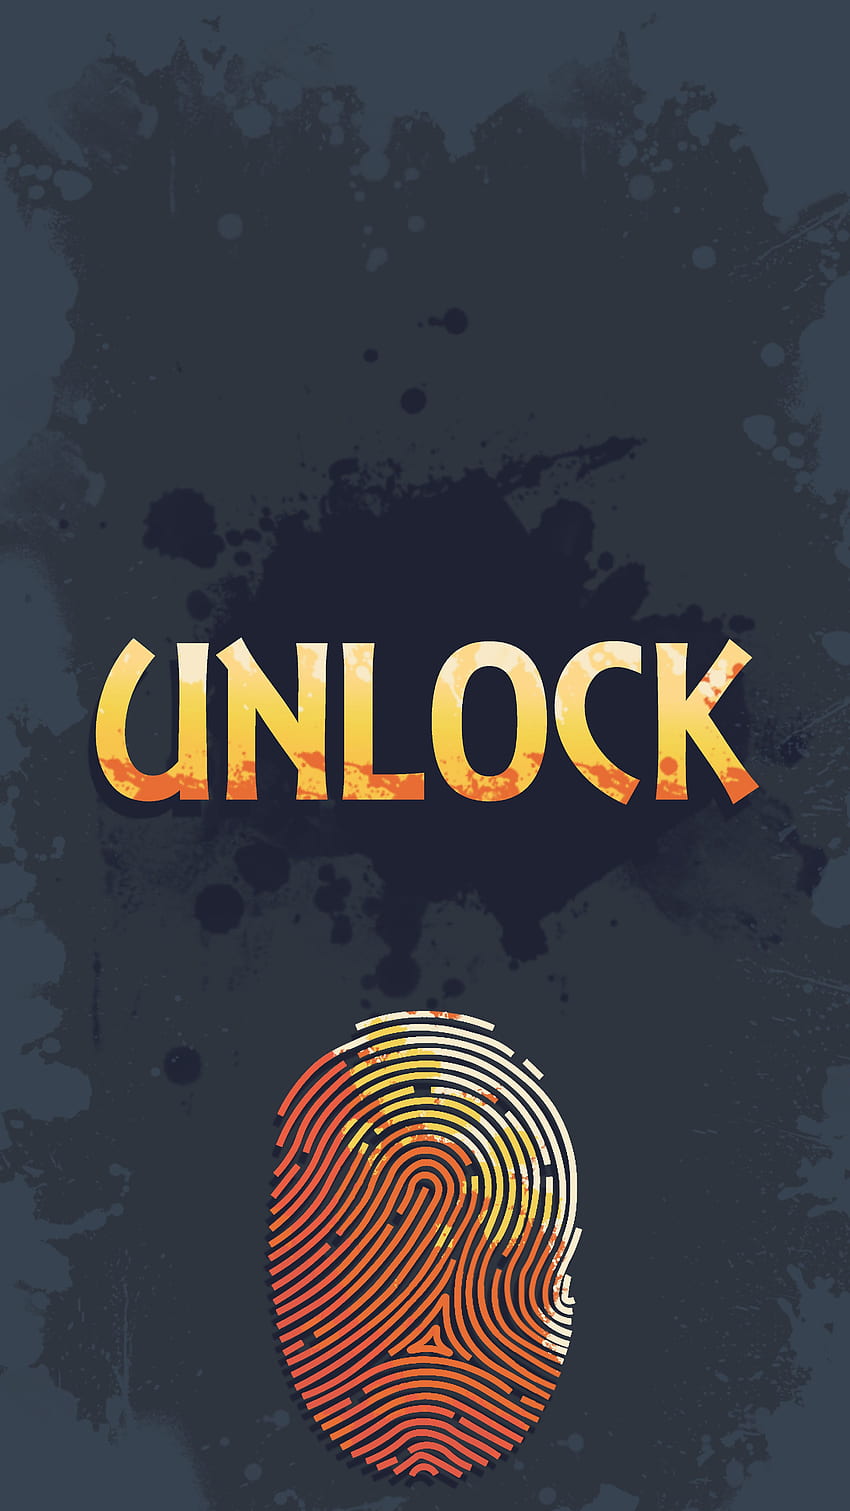 Slide to unlock - Lock screen - APK Download for Android | Aptoide